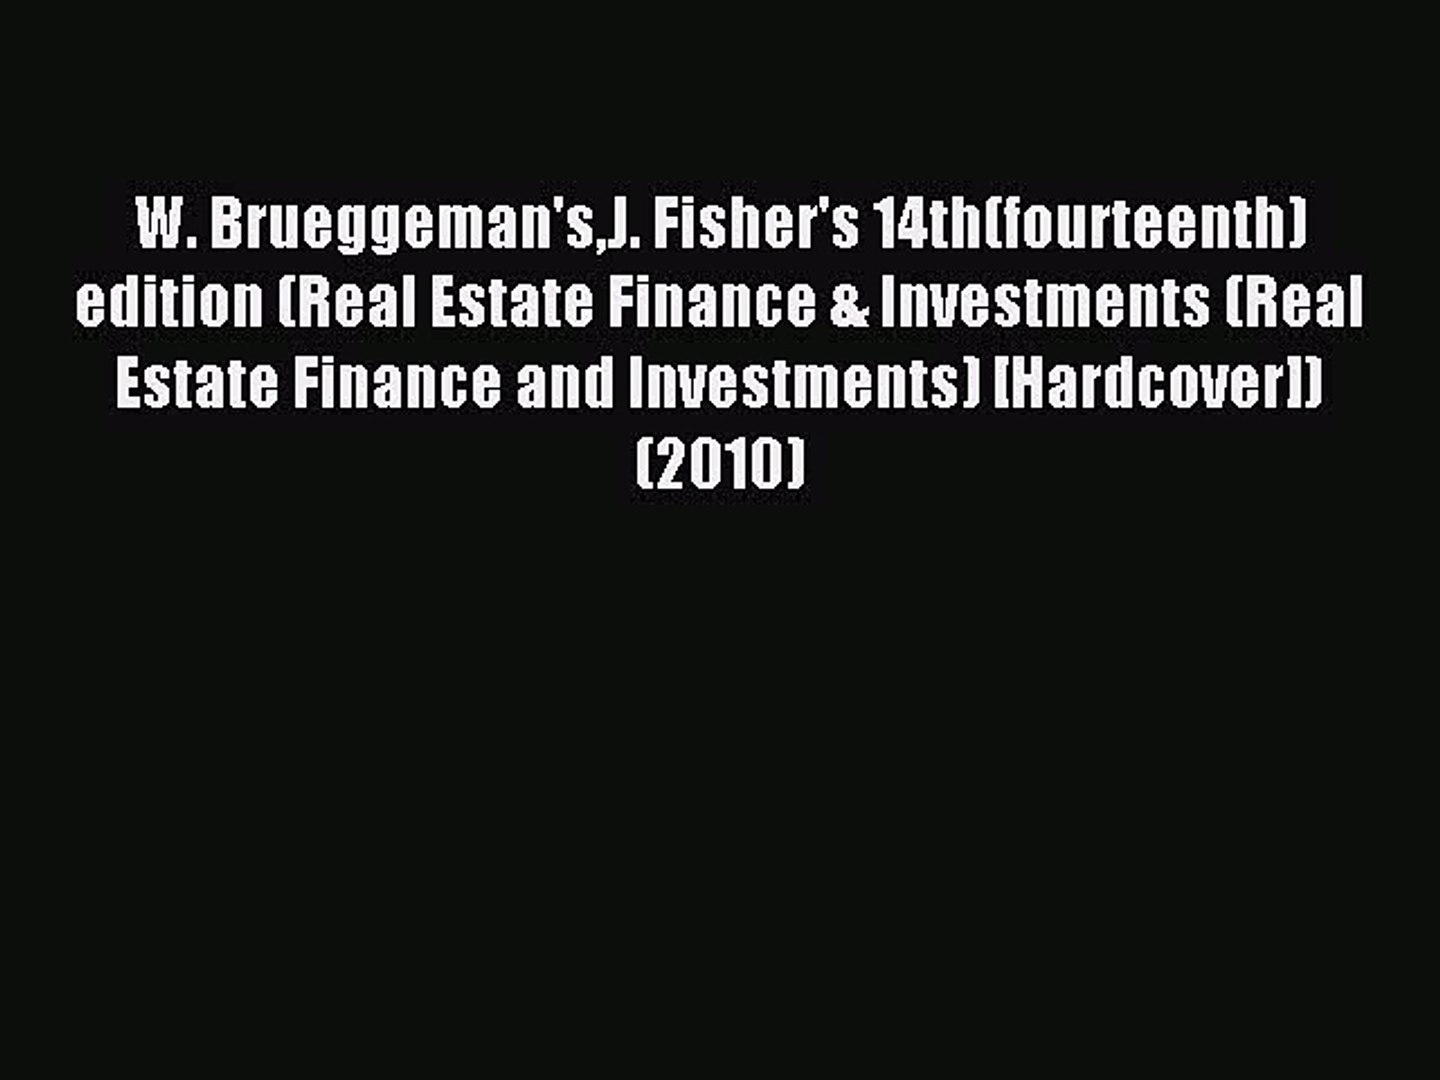 Real estate finance and investments brueggeman and fisher 14th edition Read W Brueggeman Sj Fisher S 14th Fourteenth Edition Real Estate Finance Investments Video Dailymotion